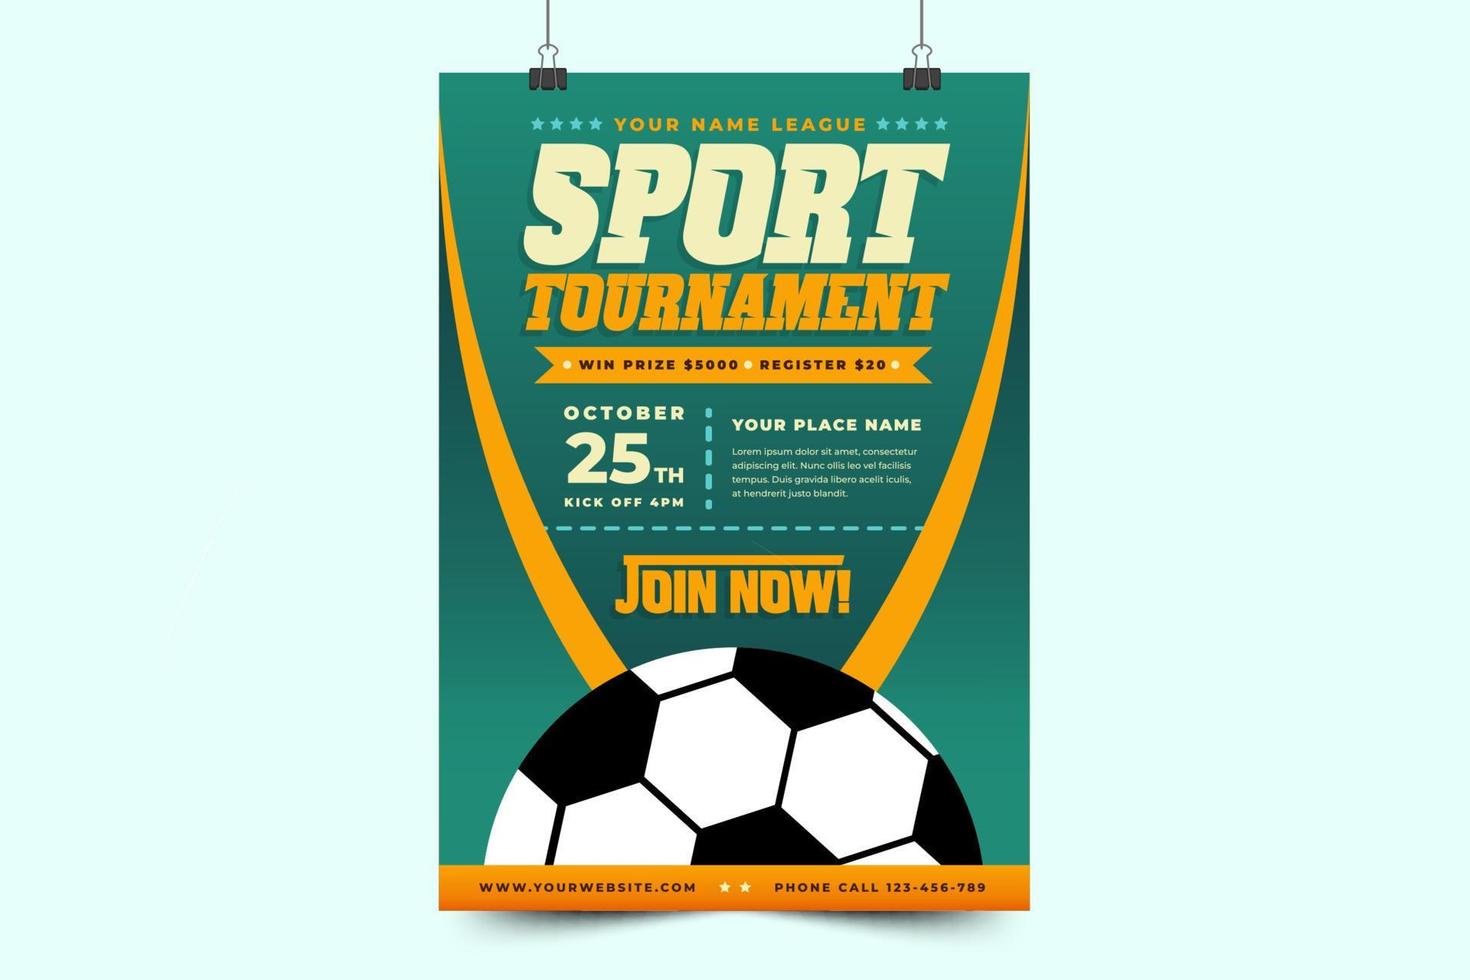 Football tournament sport event poster or flyer design template simple and elegant design vector